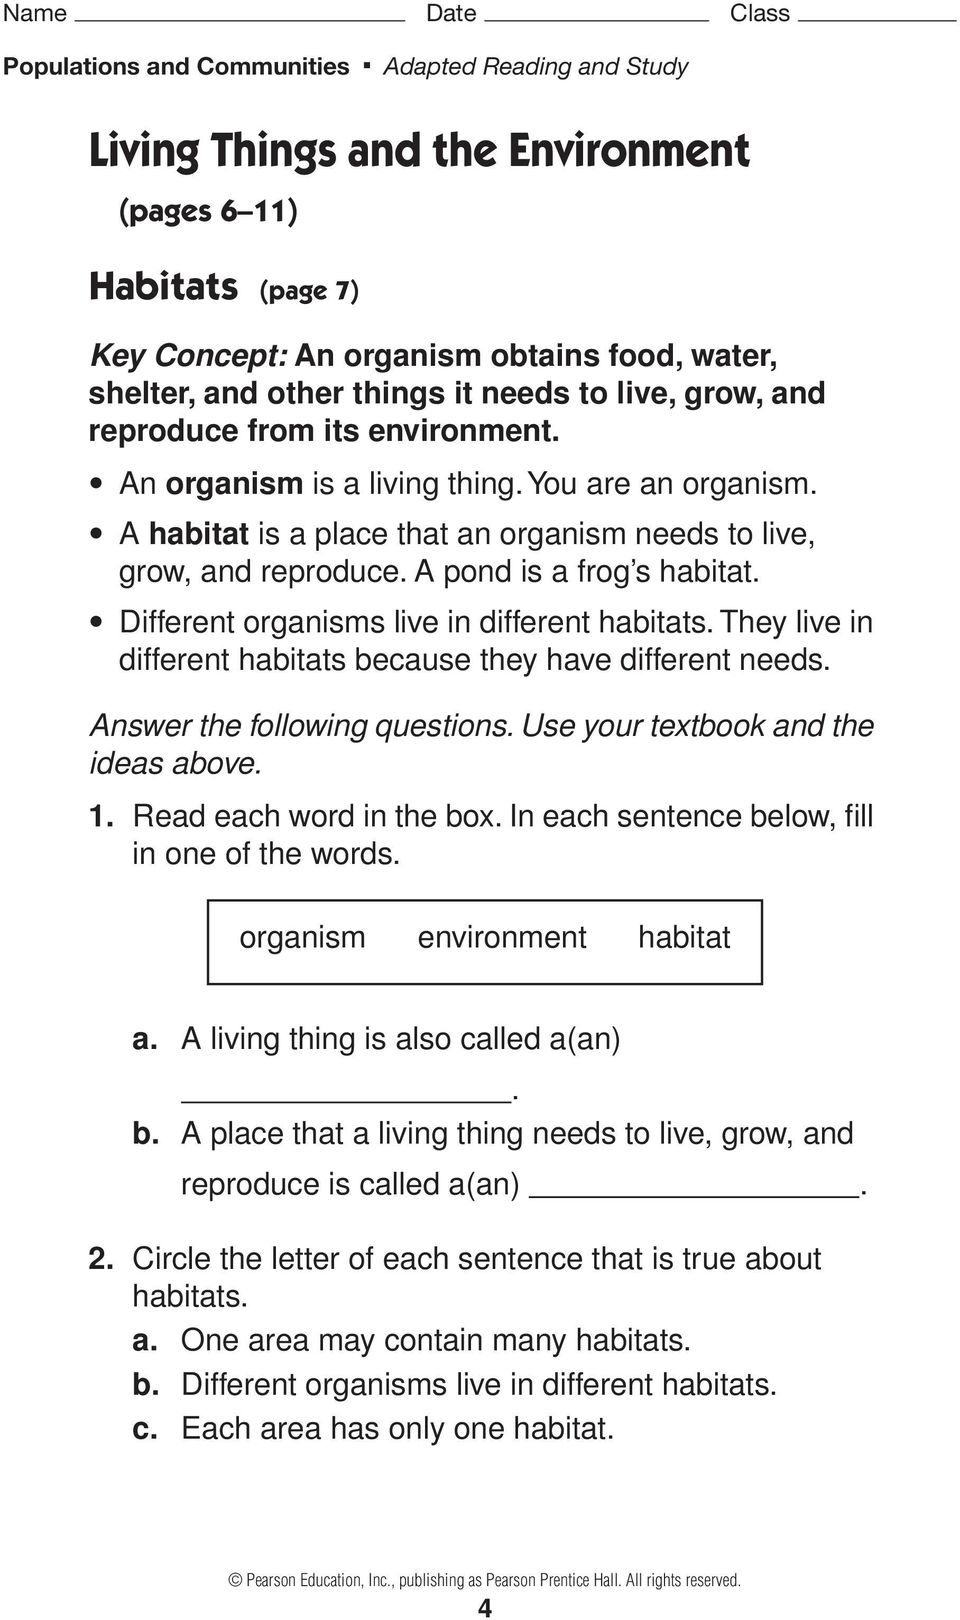 Different organisms live in different habitats. They live in different habitats because they have different needs. 1. Read each word in the box. In each sentence below, fill in one of the words.